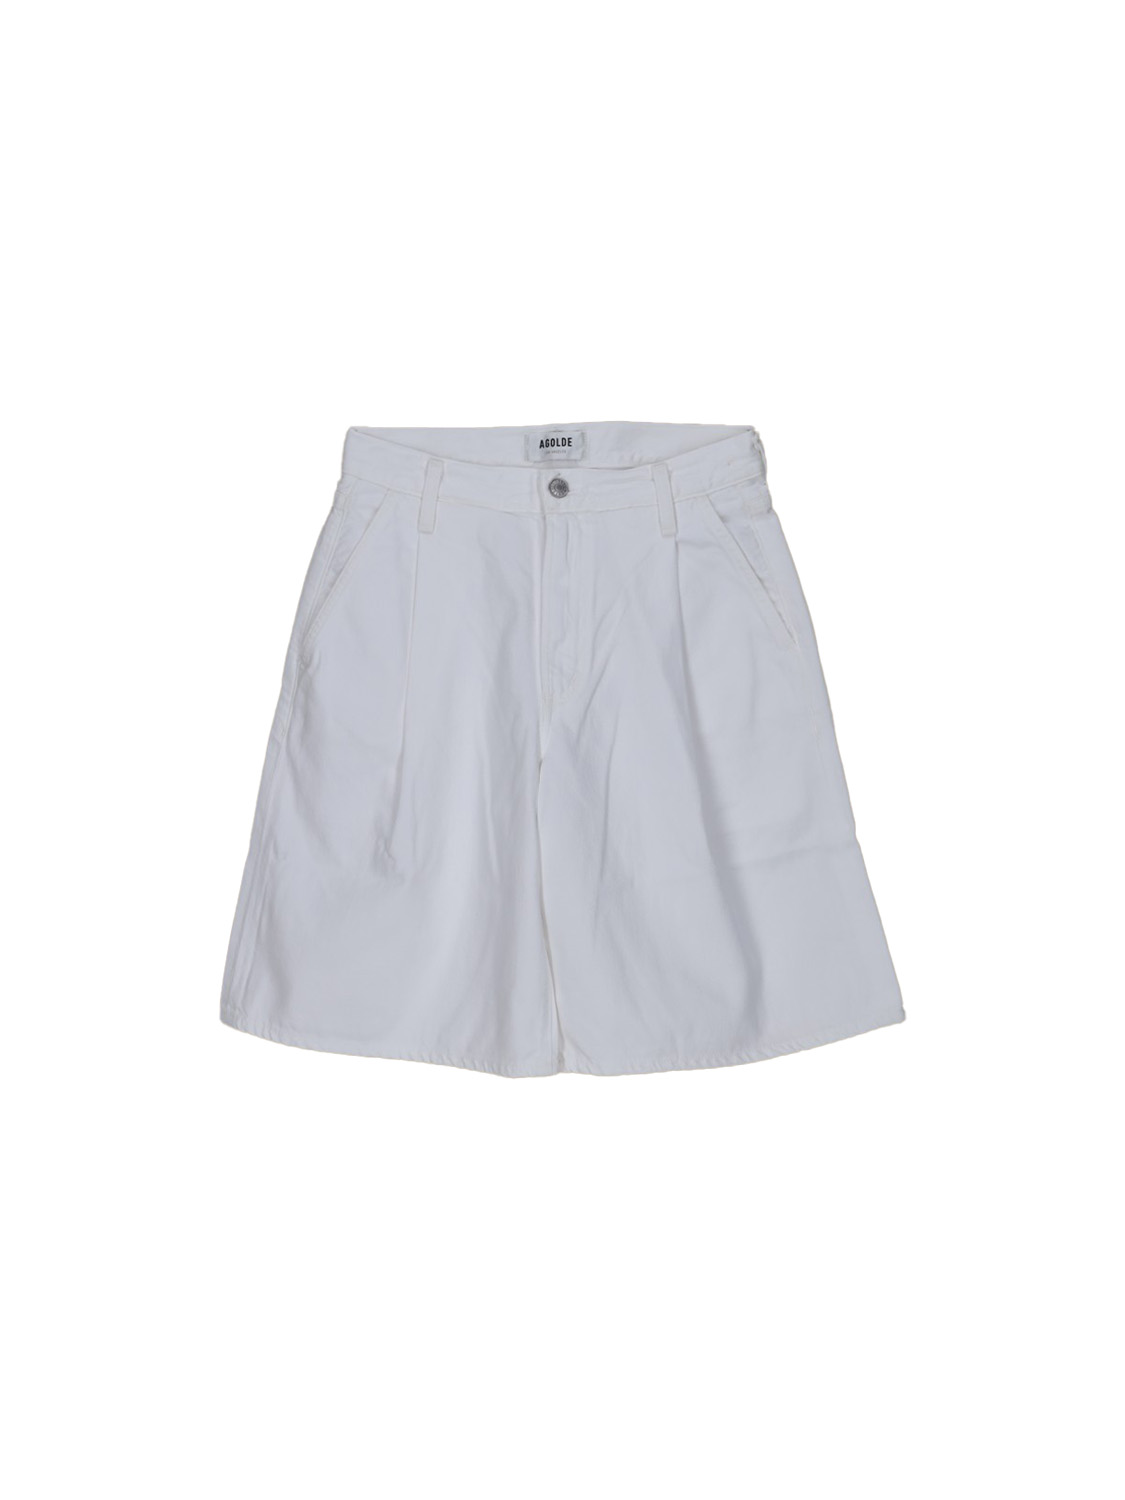 Agolde Low –rise Shorts  white 26